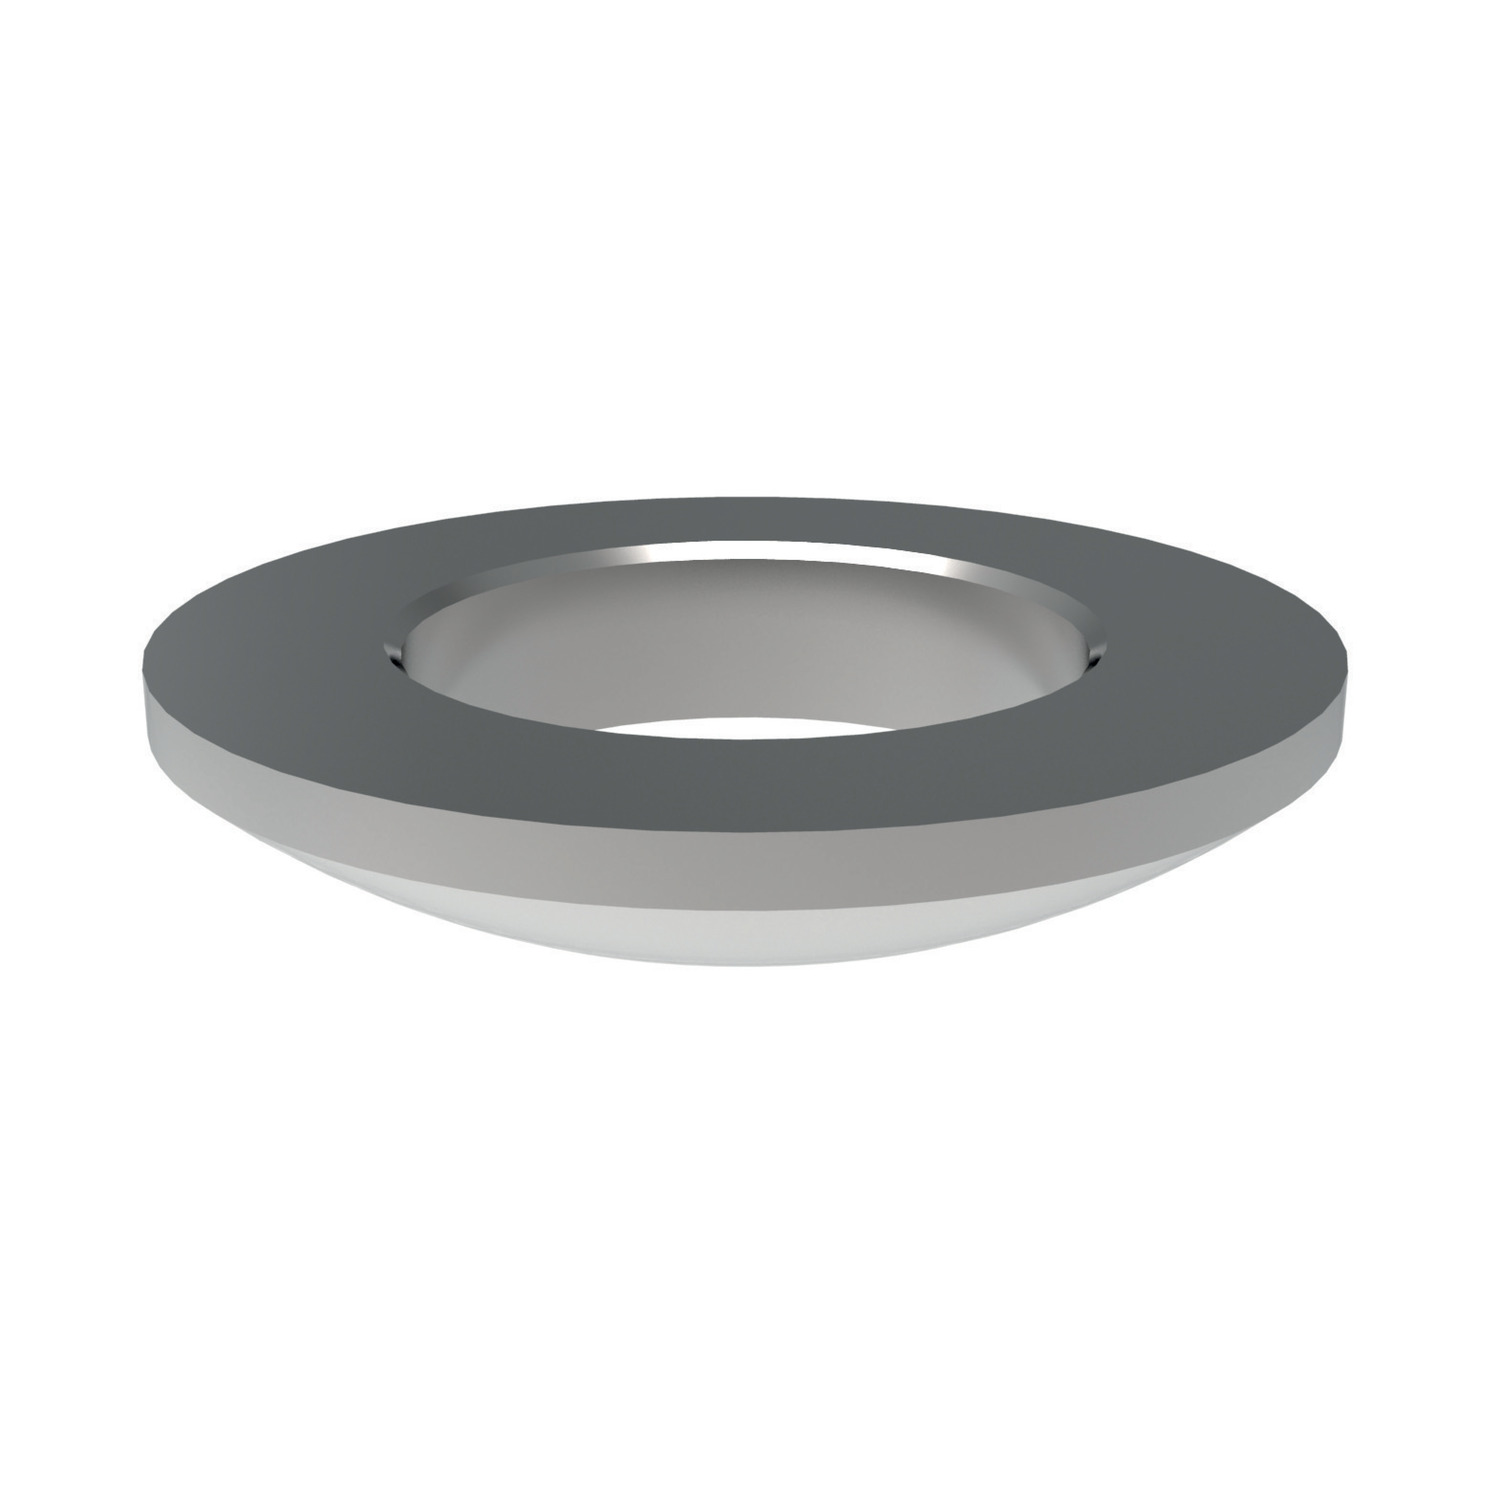 Washers - Spherical Seat Type C spherical seat washers used in conjunction with FP0352 and FP0354 dished washers dependant on the application. Made in hardened steel to DIN 6319C.